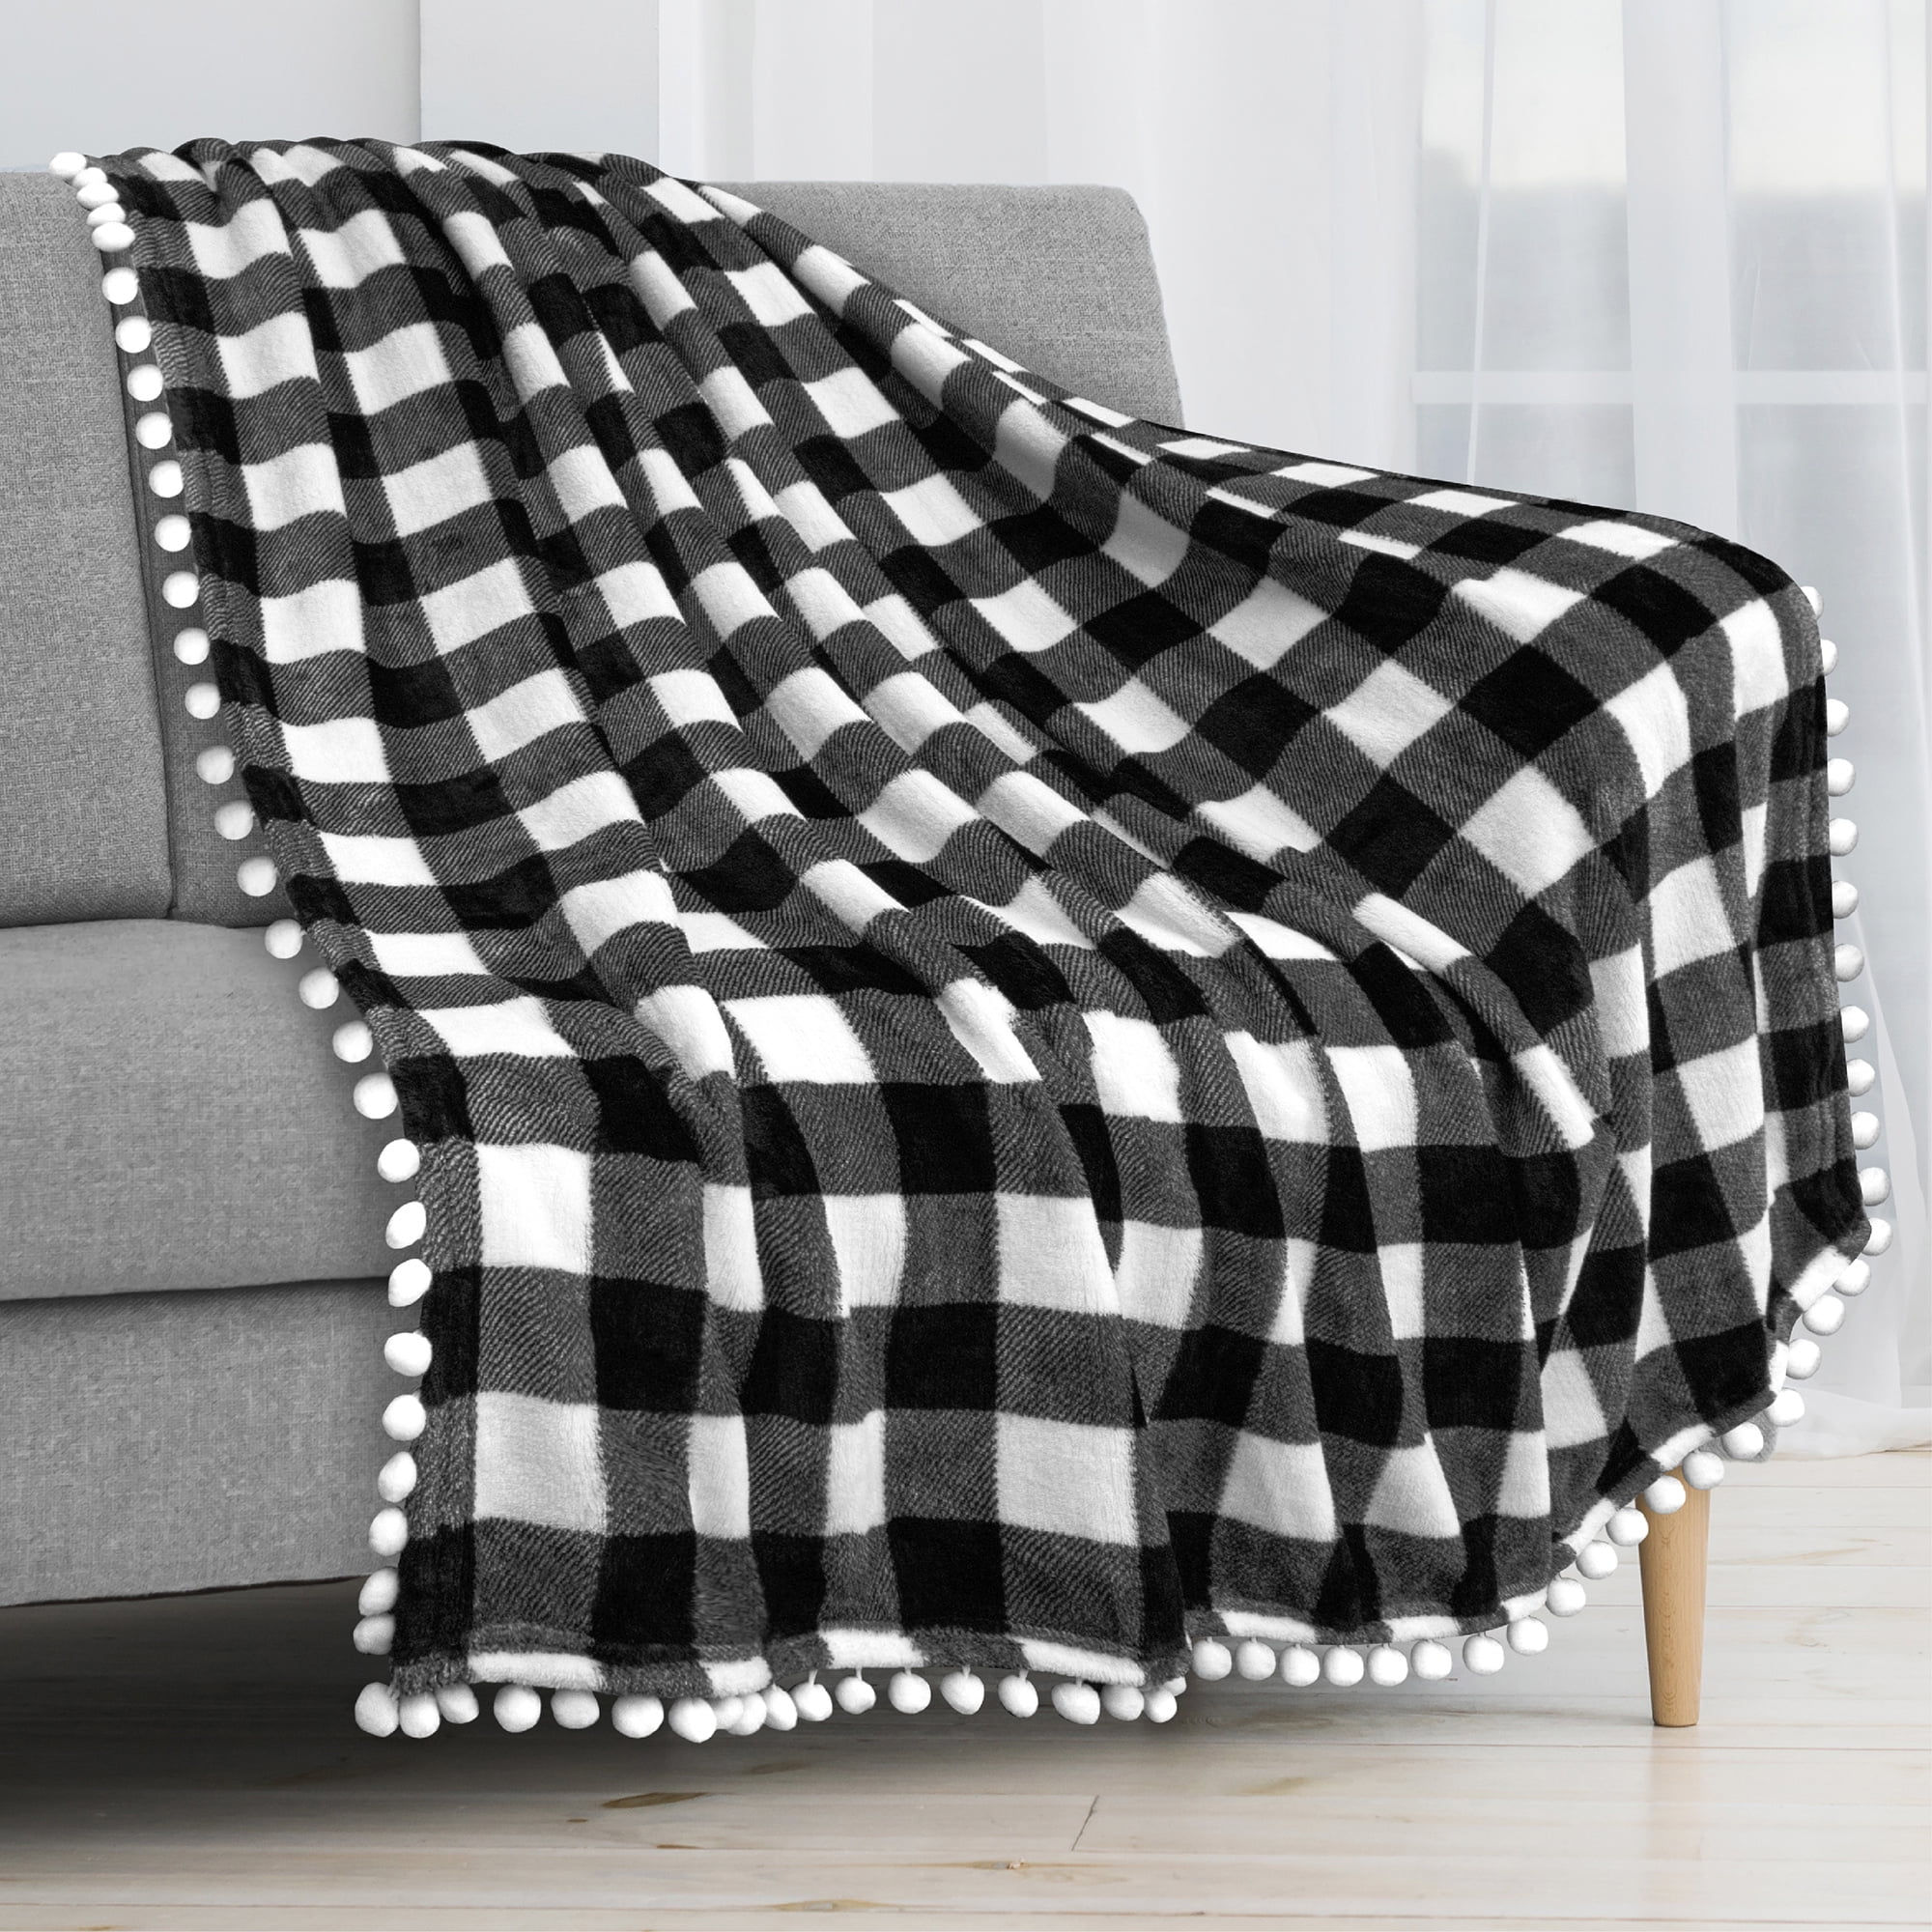 Baseball Blanket-Sport Print Throws Blankets 60x50 Twin for Girl Boy Gift for Fans Super Soft Microplush Quilt,Fleece Flannel Lightweight Comfort for Bed Sofa